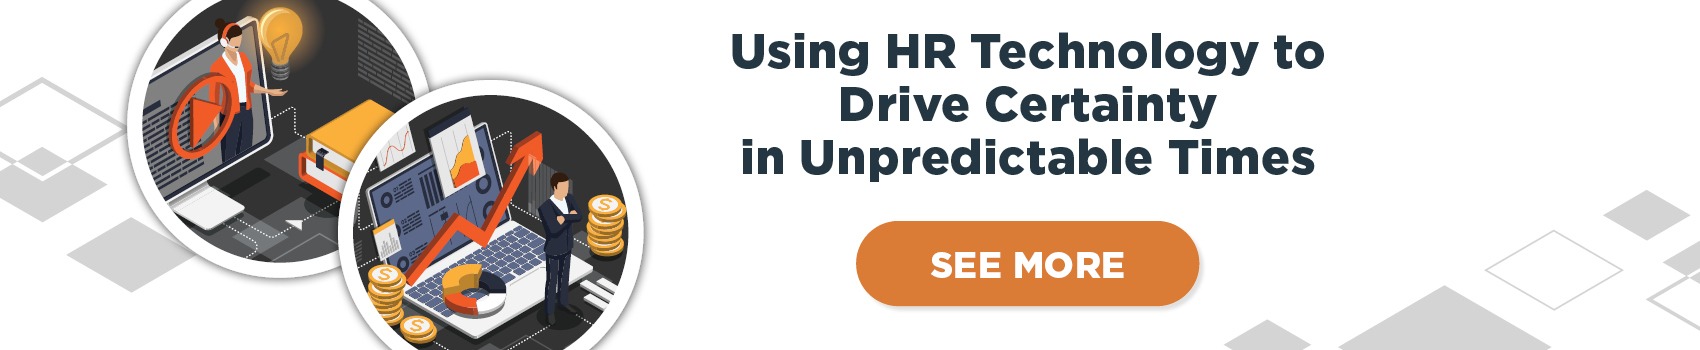 Using HR Technology to Drive Certainty in Unpredictable Times SEE MORE